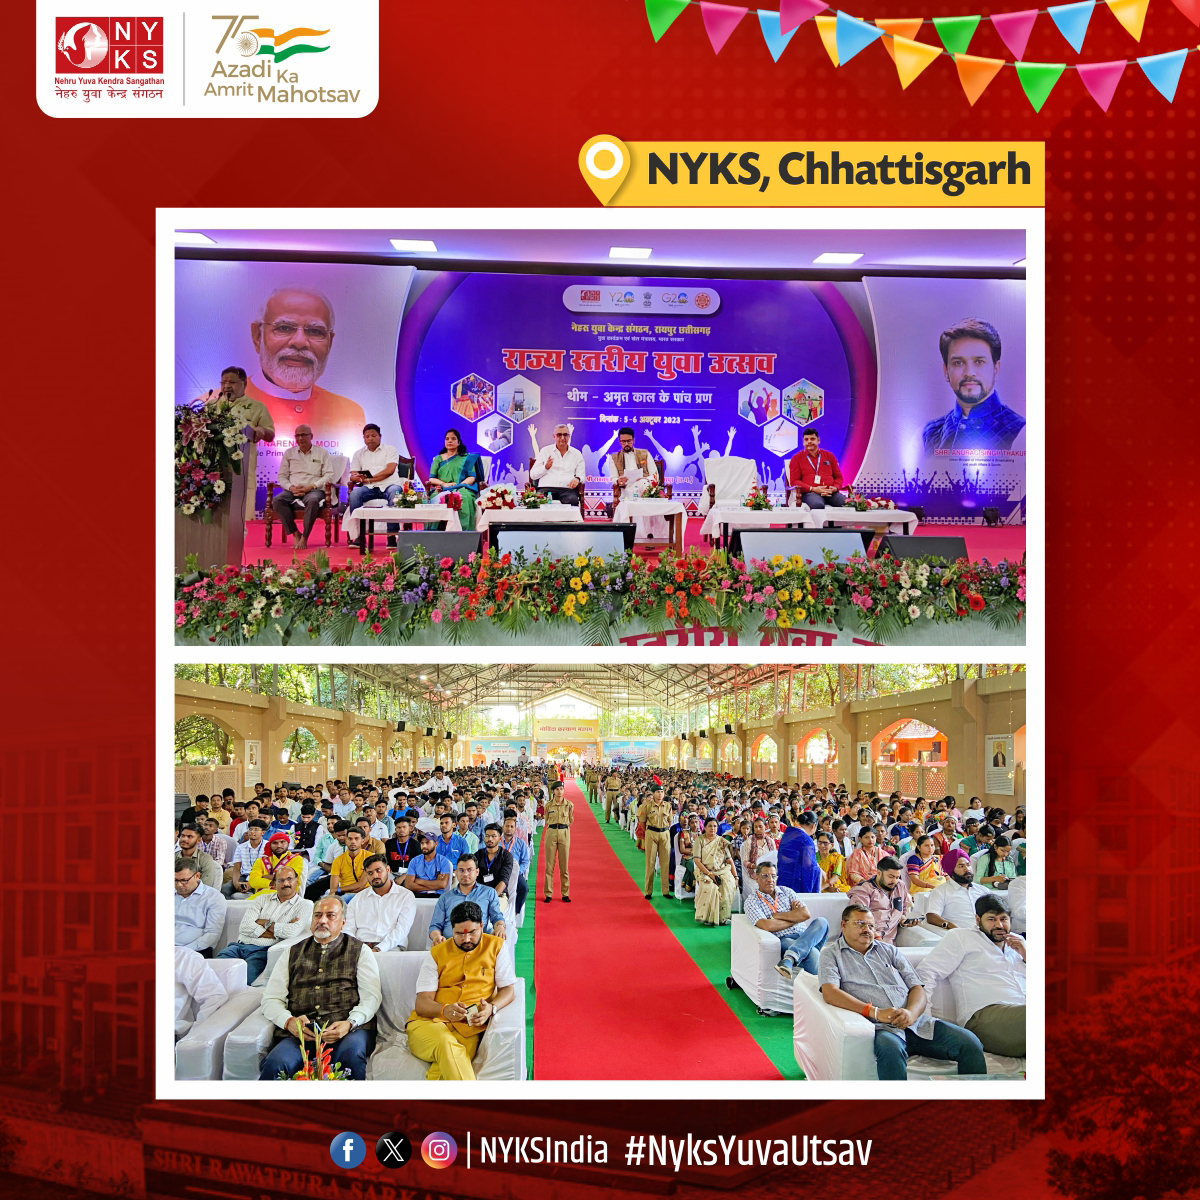 🎉 Exciting times at the State Level #YuvaUtsav in Raipur! Honoured to have Shri Anurag Singh Thakur, our esteemed Union Minister, join us as we kick off this incredible celebration of youth and talent. We're excited to see so many eager faces ready to make a positive impact!